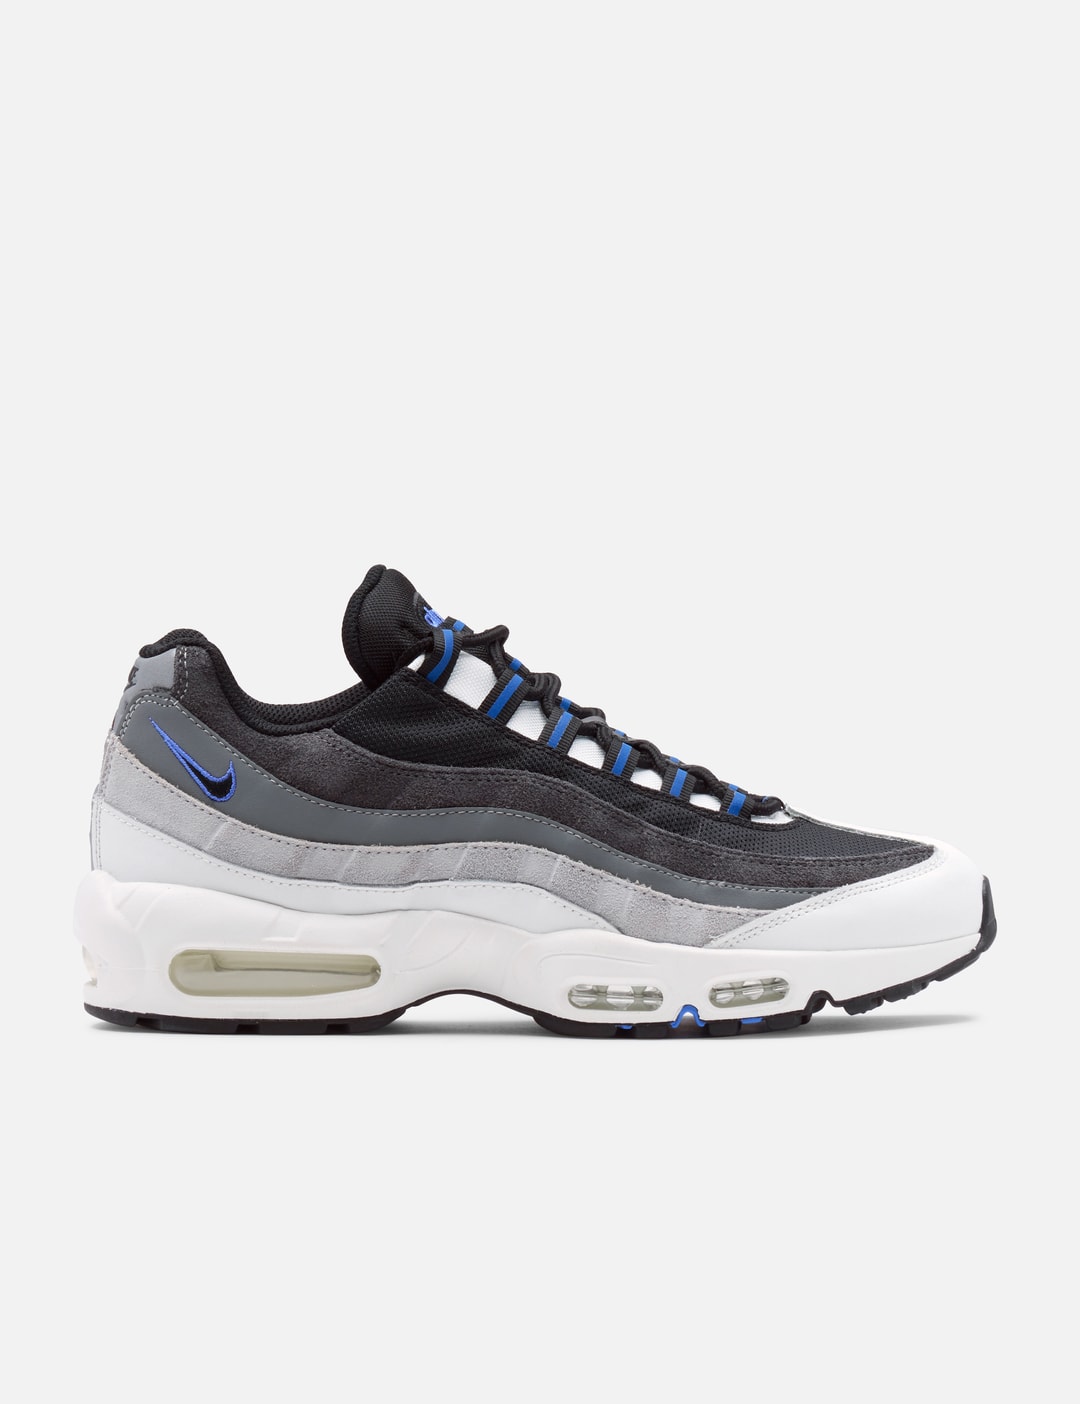 Nike - Nike Air Max 95 | HBX - Globally Curated Fashion and Lifestyle ...